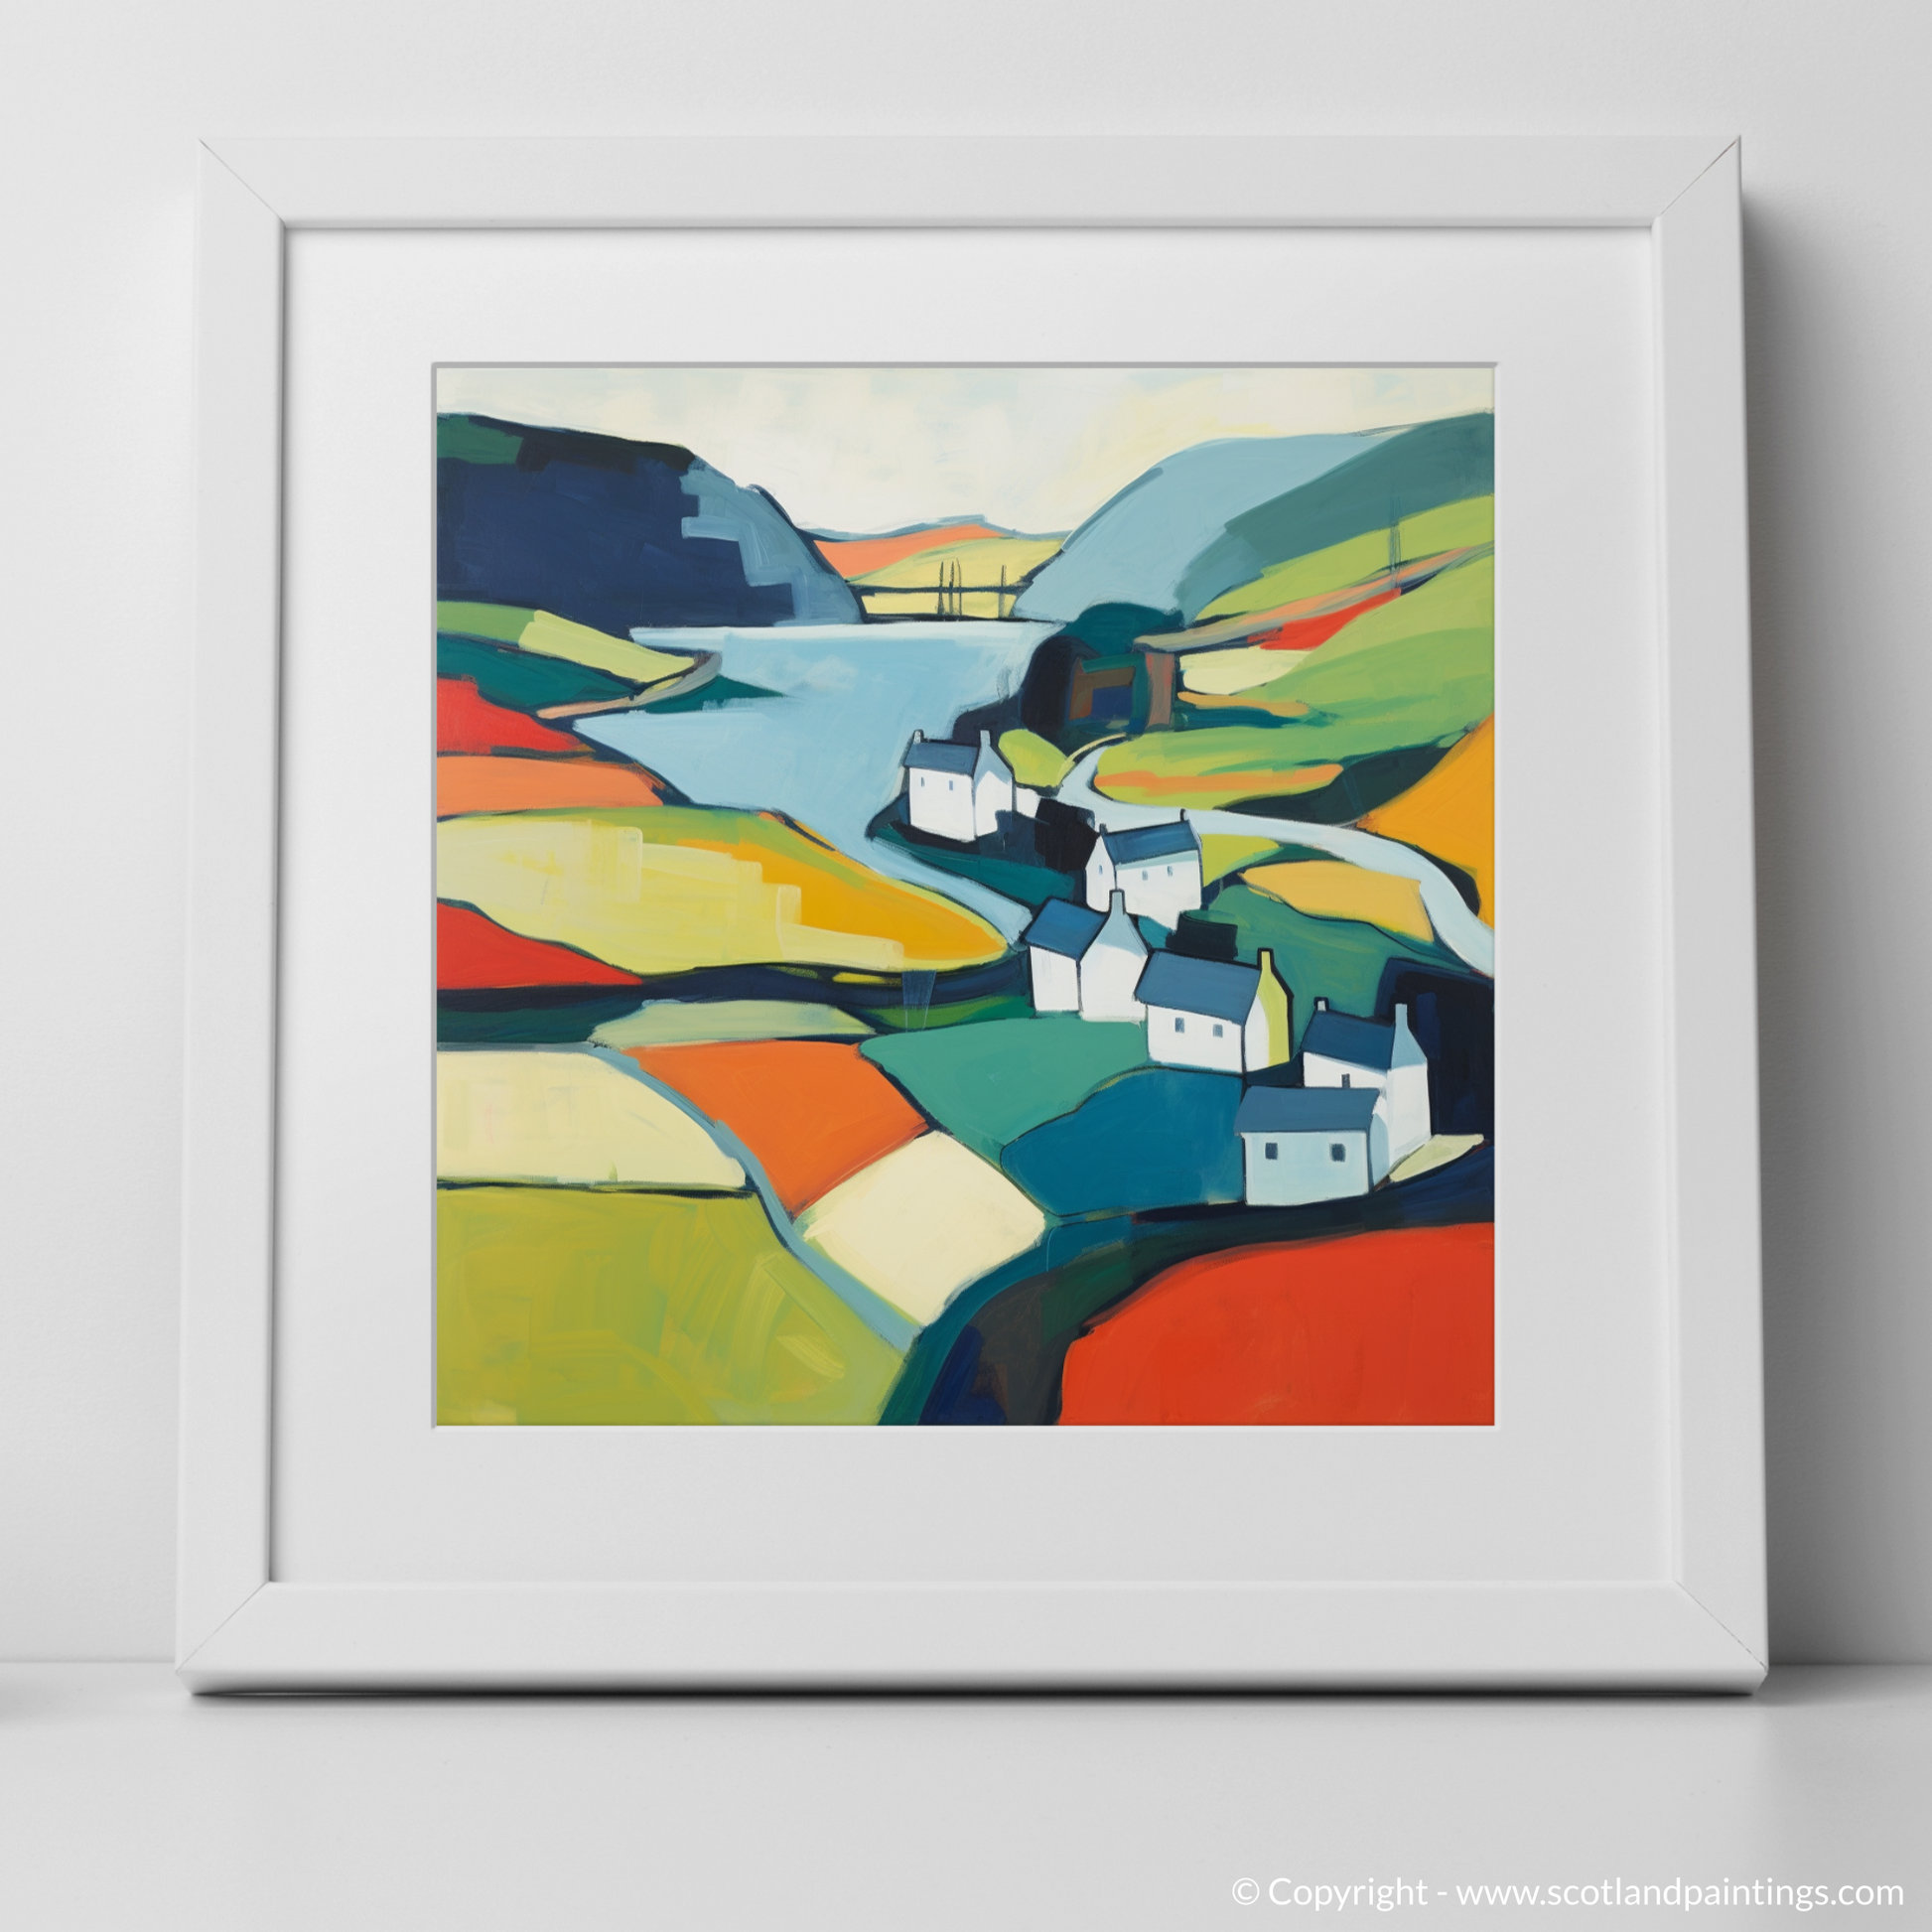 Art Print of Glenmore, Highlands with a white frame